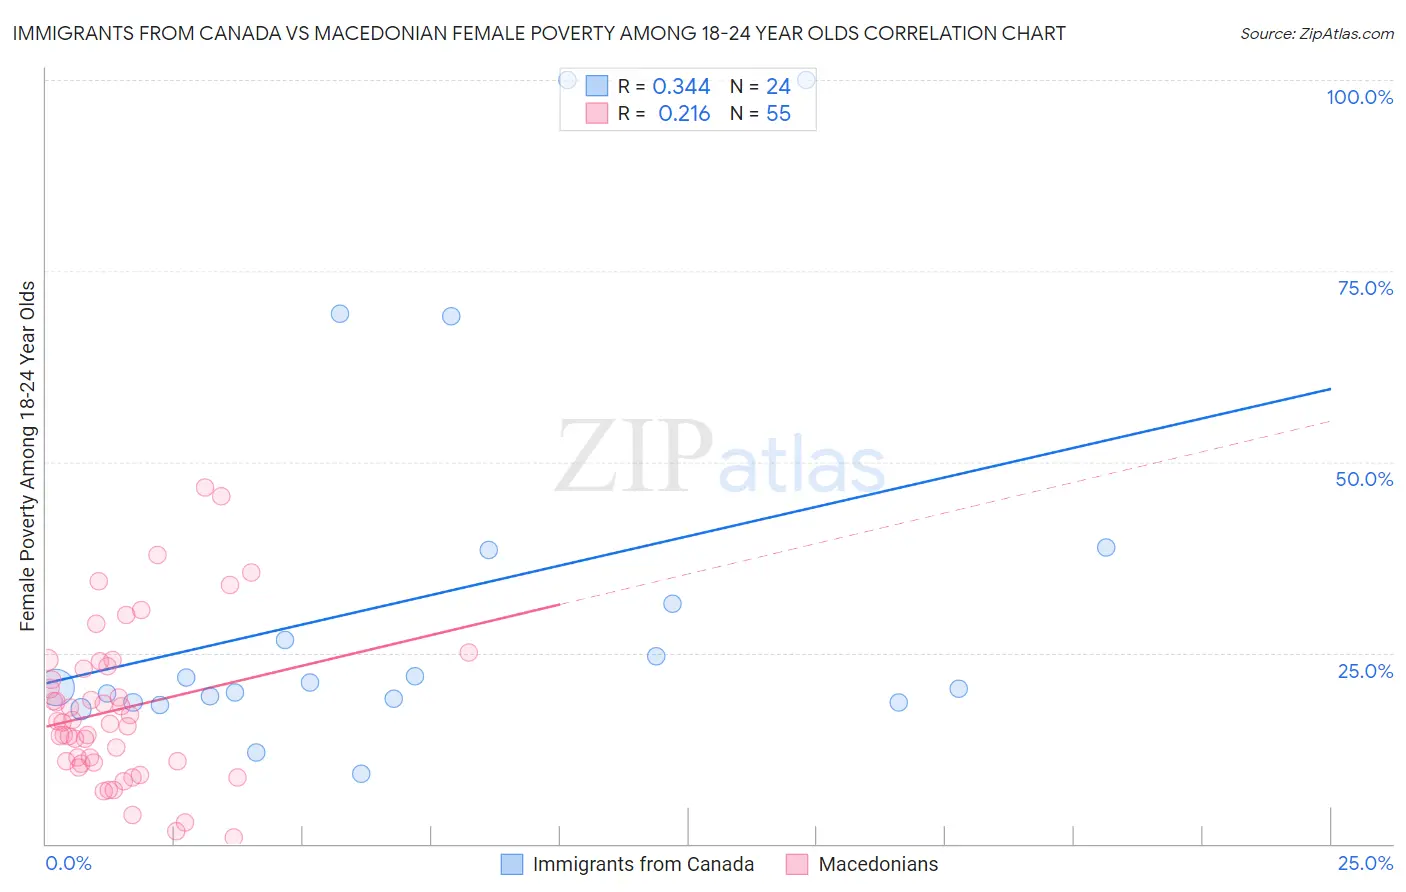 Immigrants from Canada vs Macedonian Female Poverty Among 18-24 Year Olds